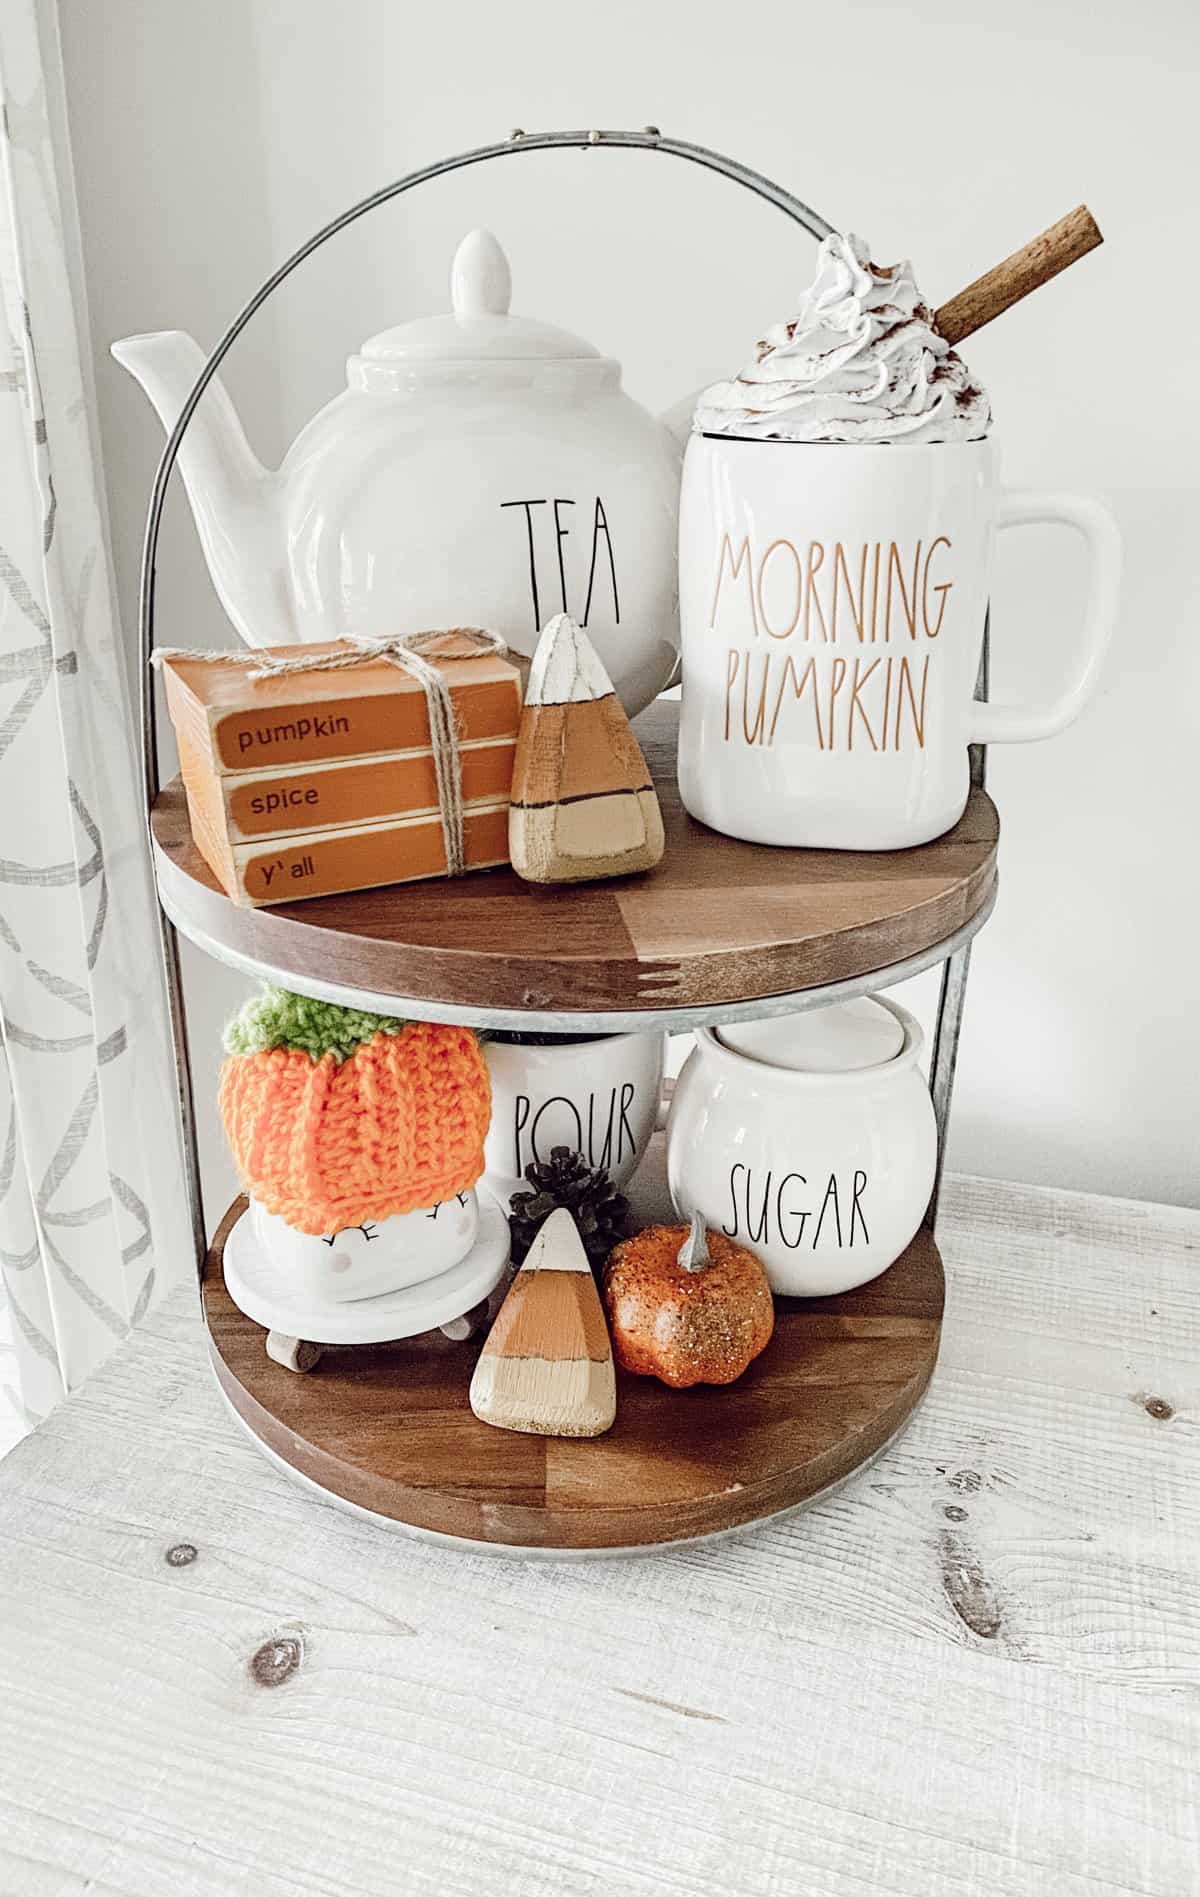 Tips for Adding Simple, Fall Touches to Tiered Trays